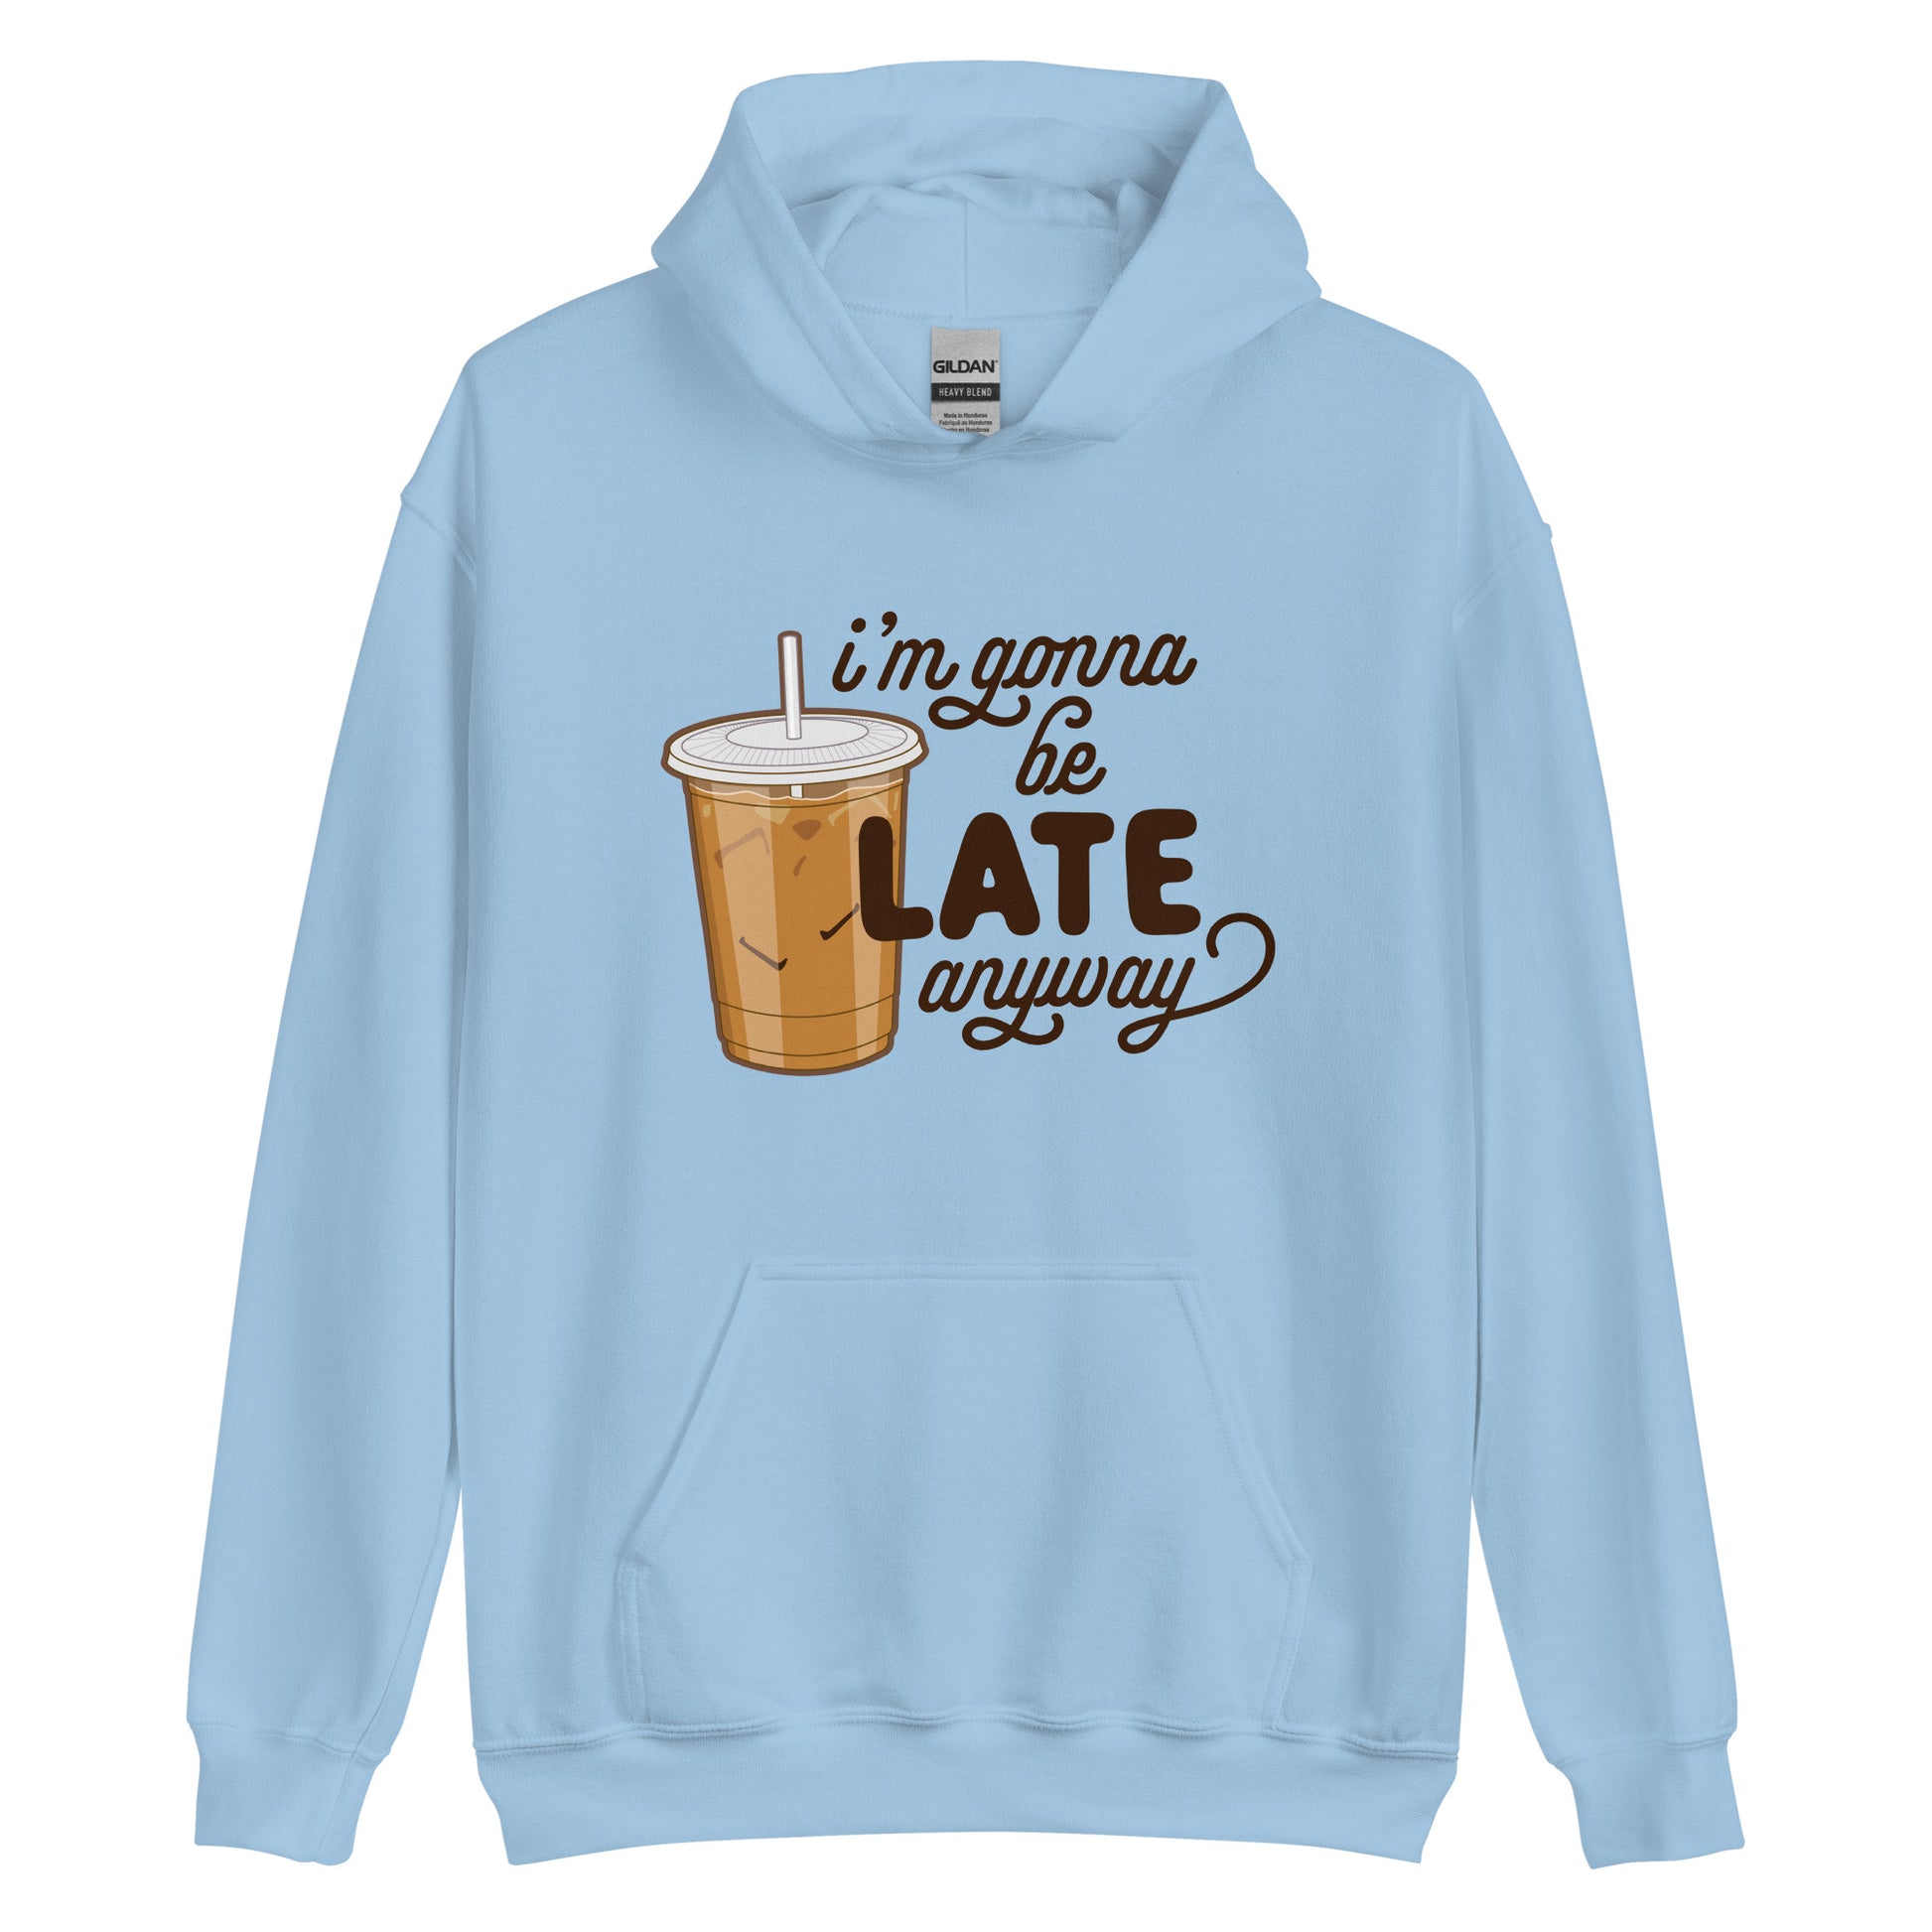 A light pink hooded sweatshirt featuring an illustration of iced coffee. Text next to the coffee reads "I'm gonna be LATE anyway".